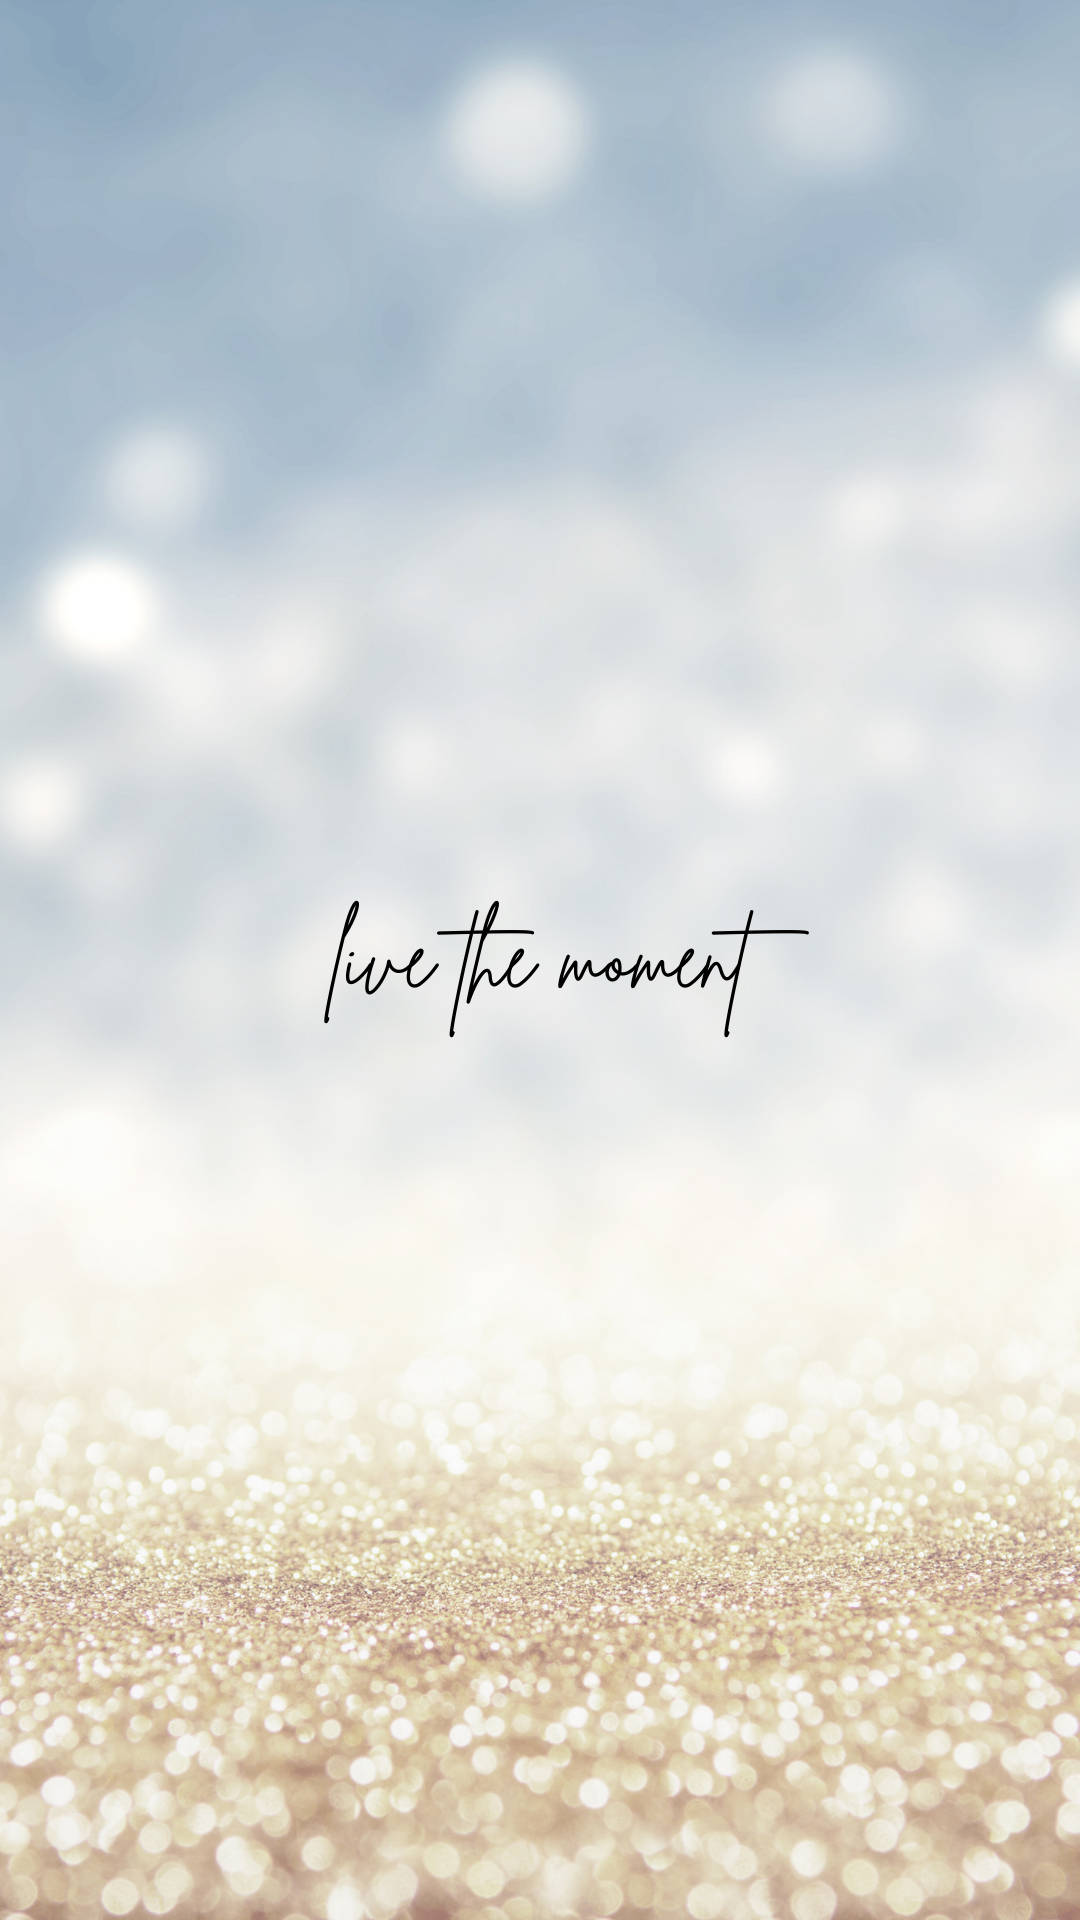 Uplifting Message - Live The Moment